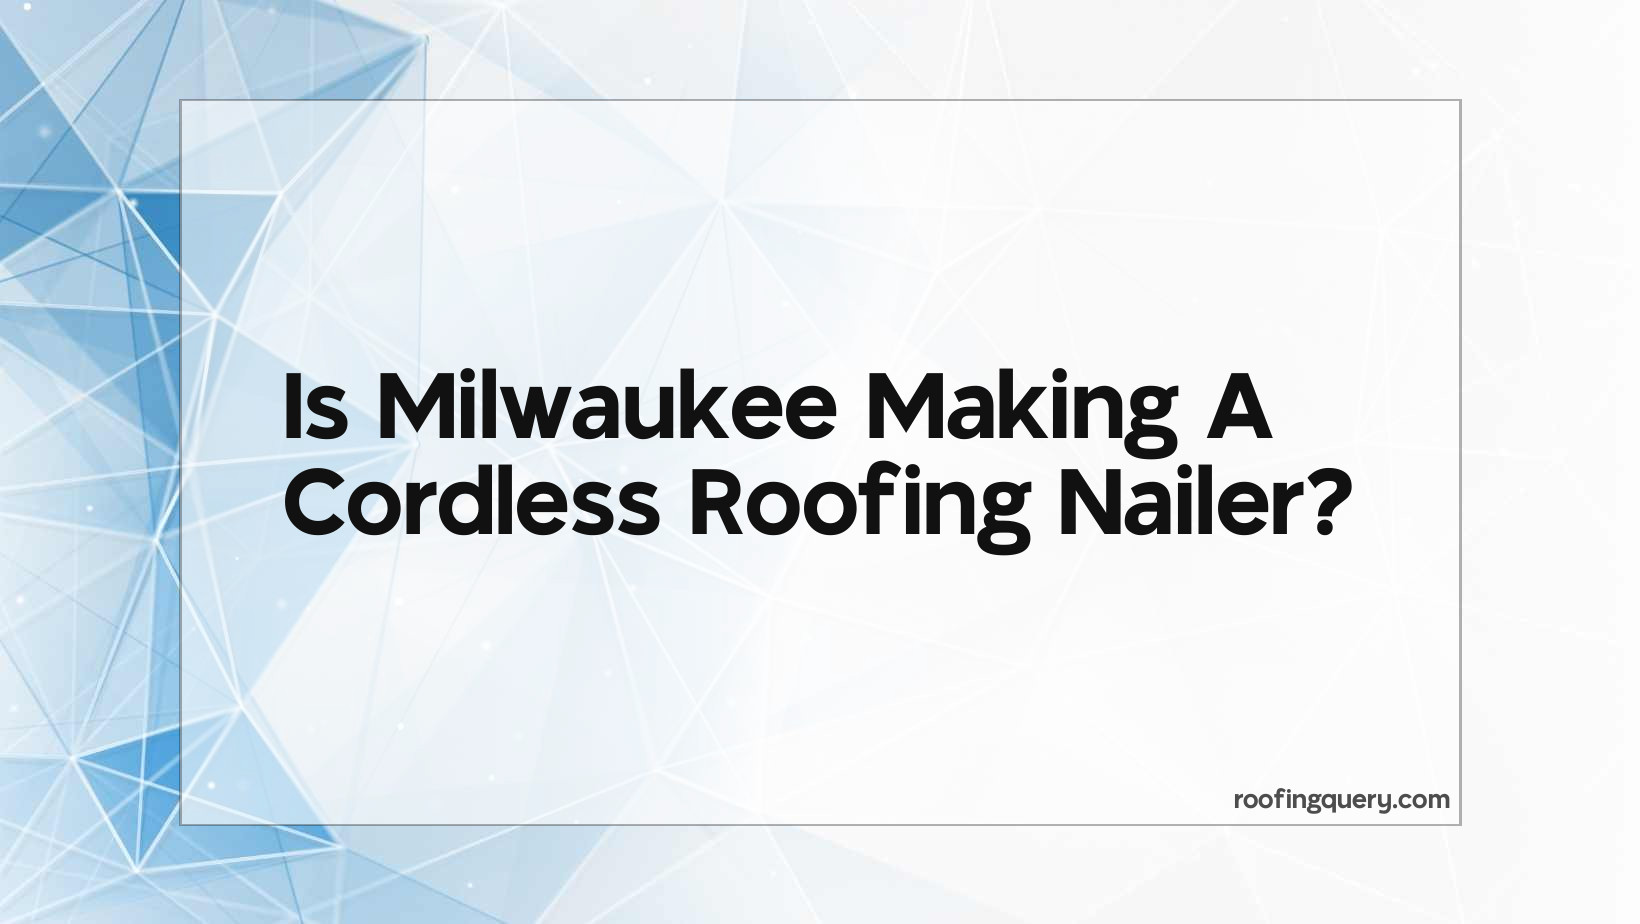 Is Milwaukee Making A Cordless Roofing Nailer?